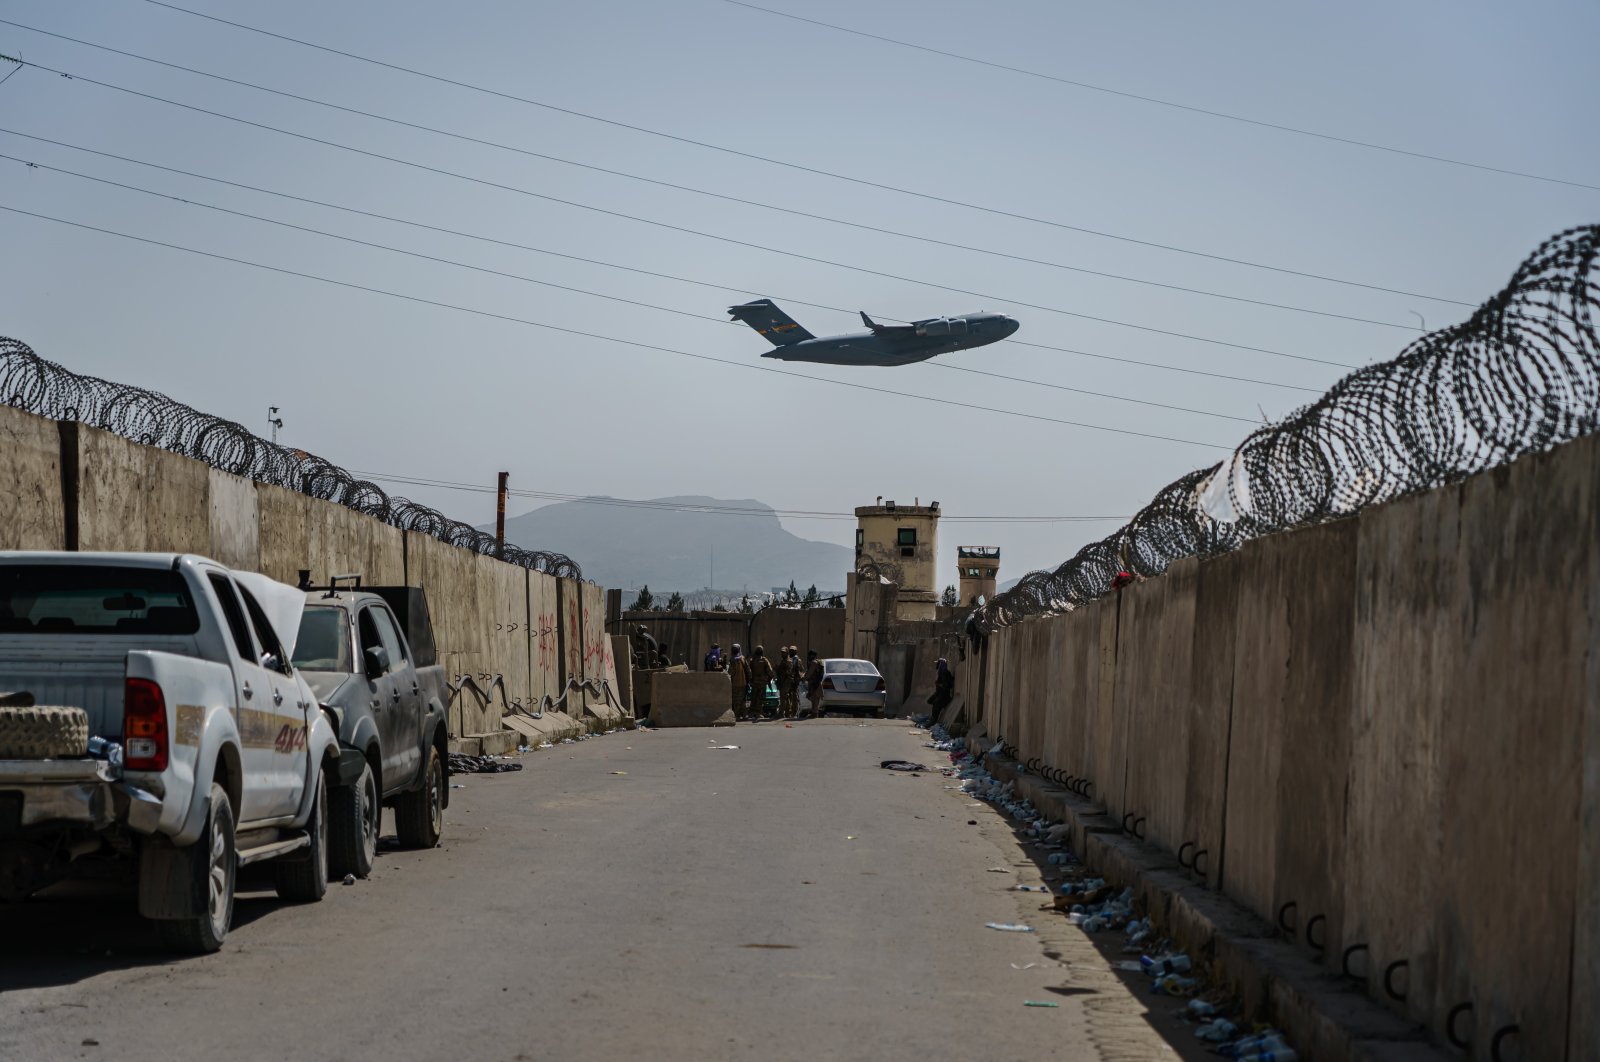 A C-17 Globemaster takes off as Taliban fighters secure the outer perimeter, alongside the American controlled side of of the Hamid Karzai International Airport in Kabul, Afghanistan, Aug. 29, 2021. (Photo by Getty Images)